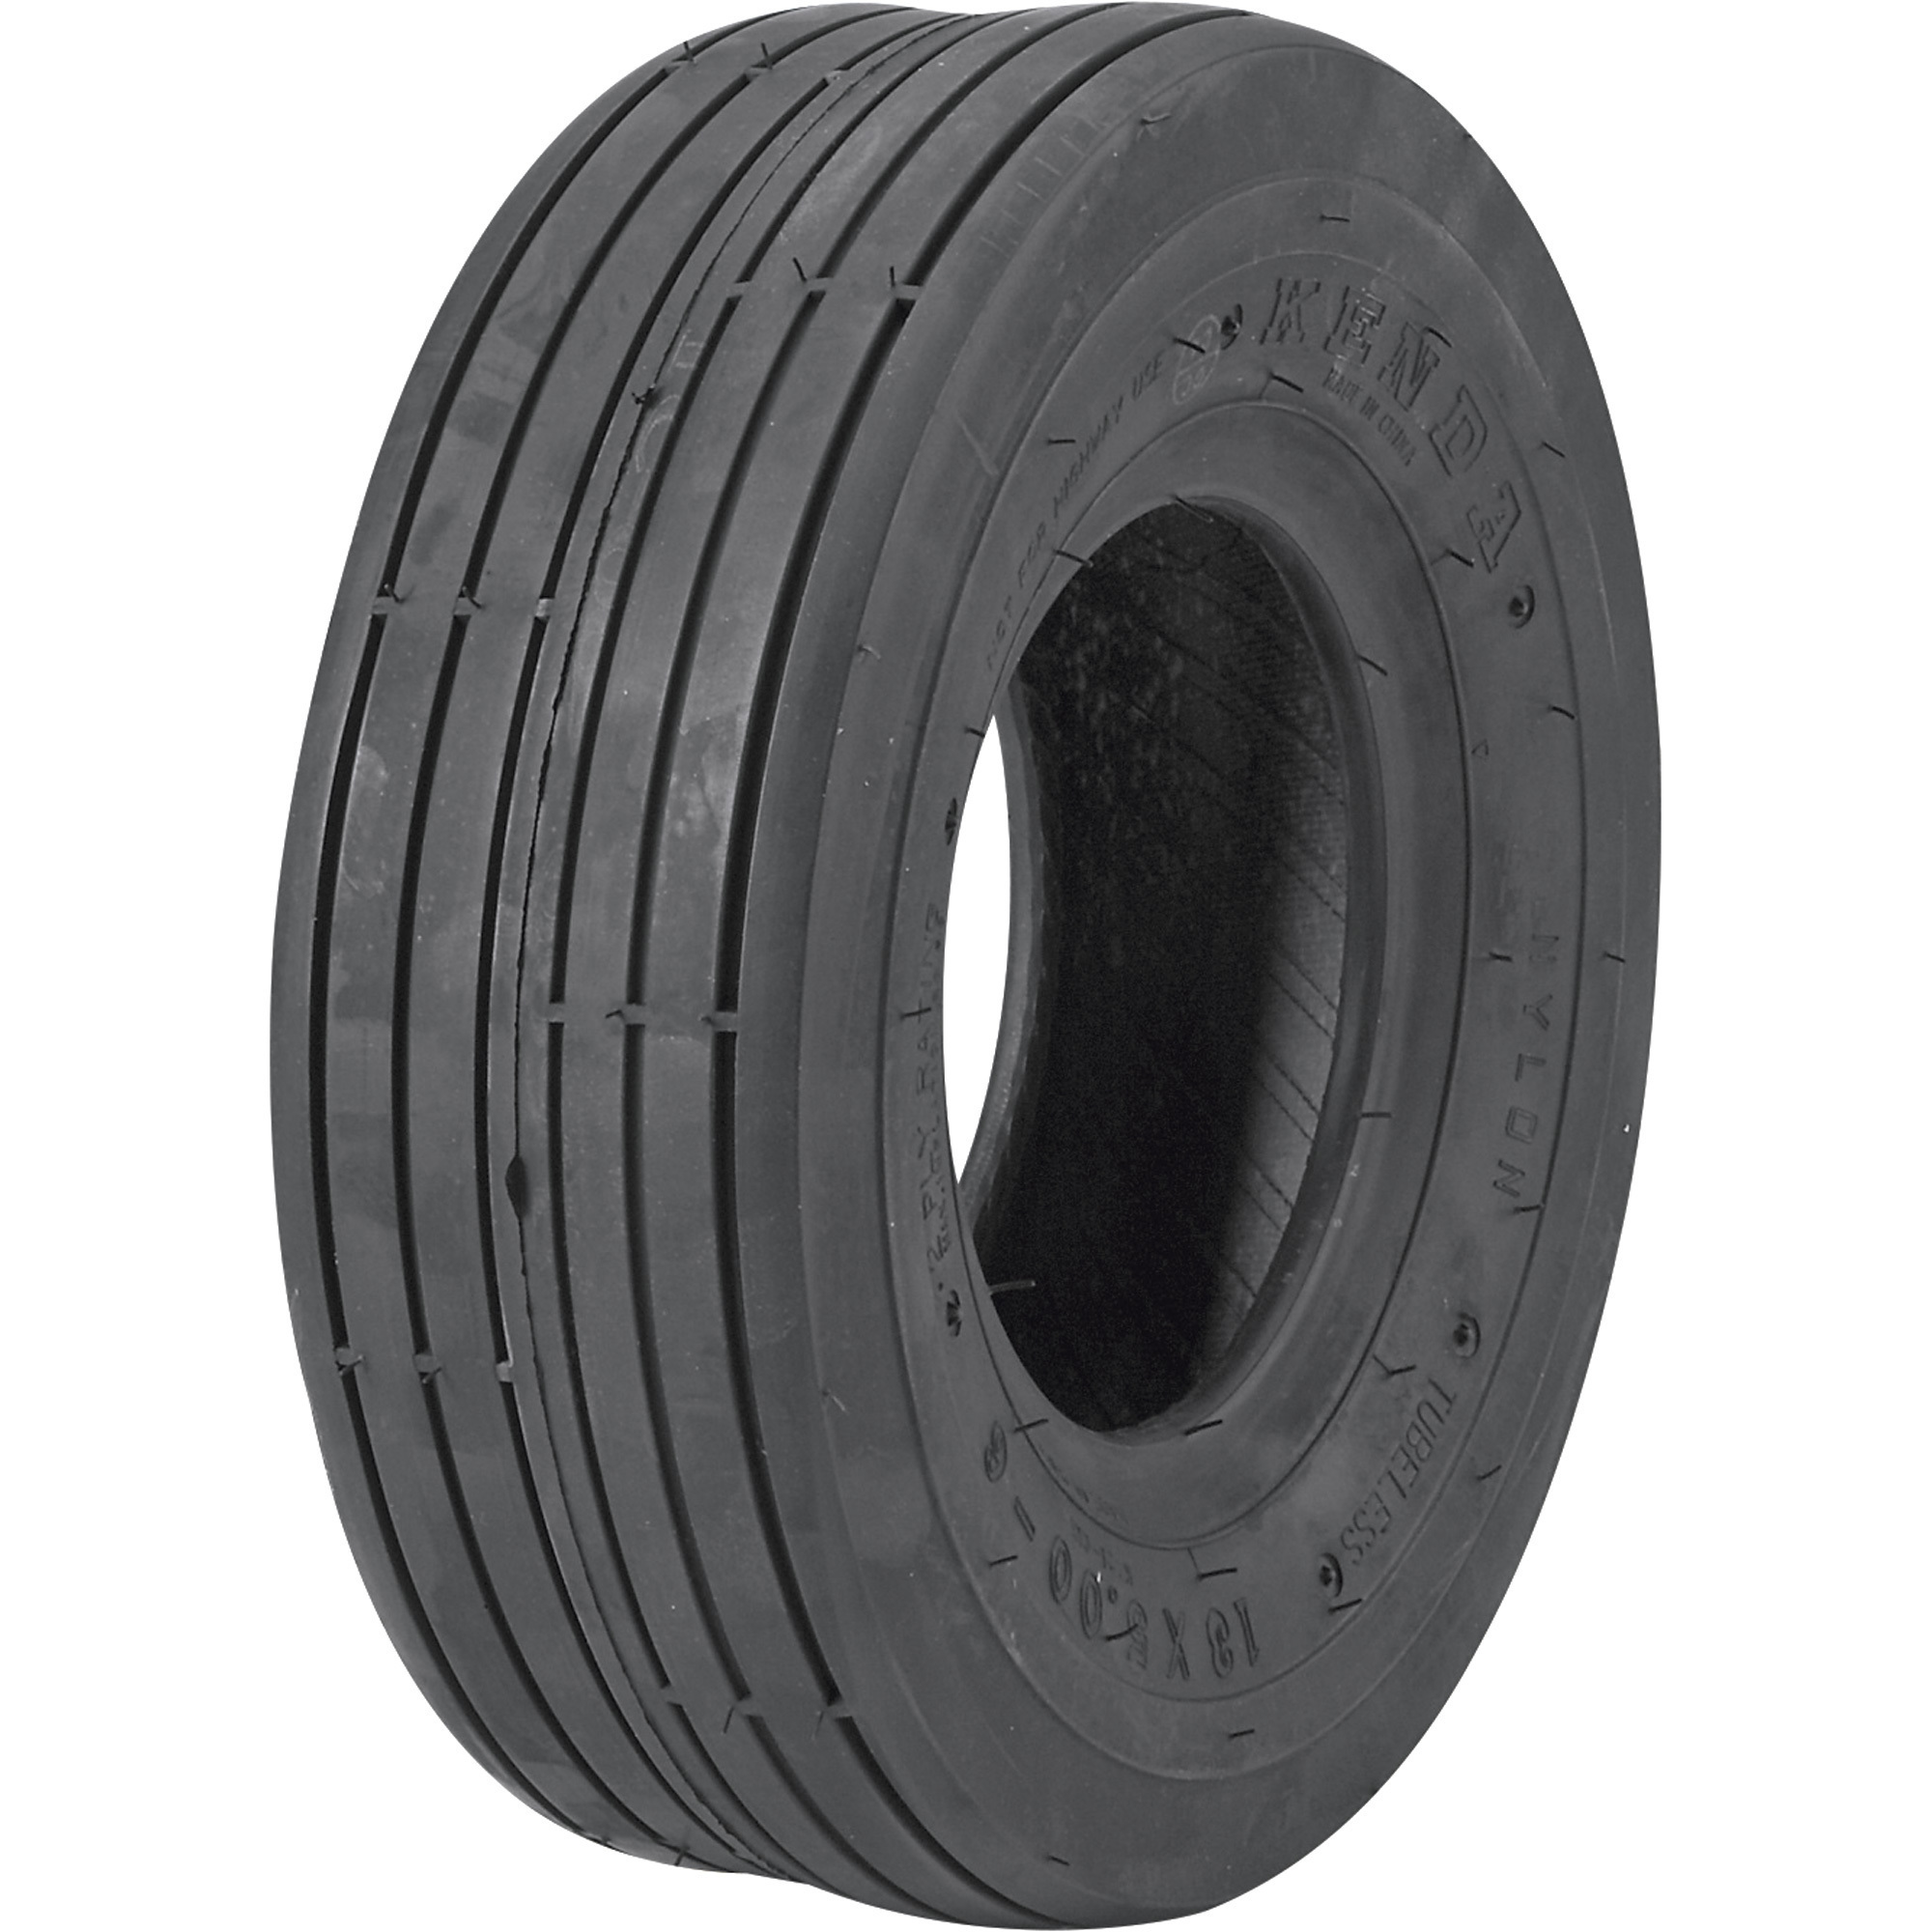 Kenda Tubeless Ribbed Tread Replacement Tire â 13 x 500-6